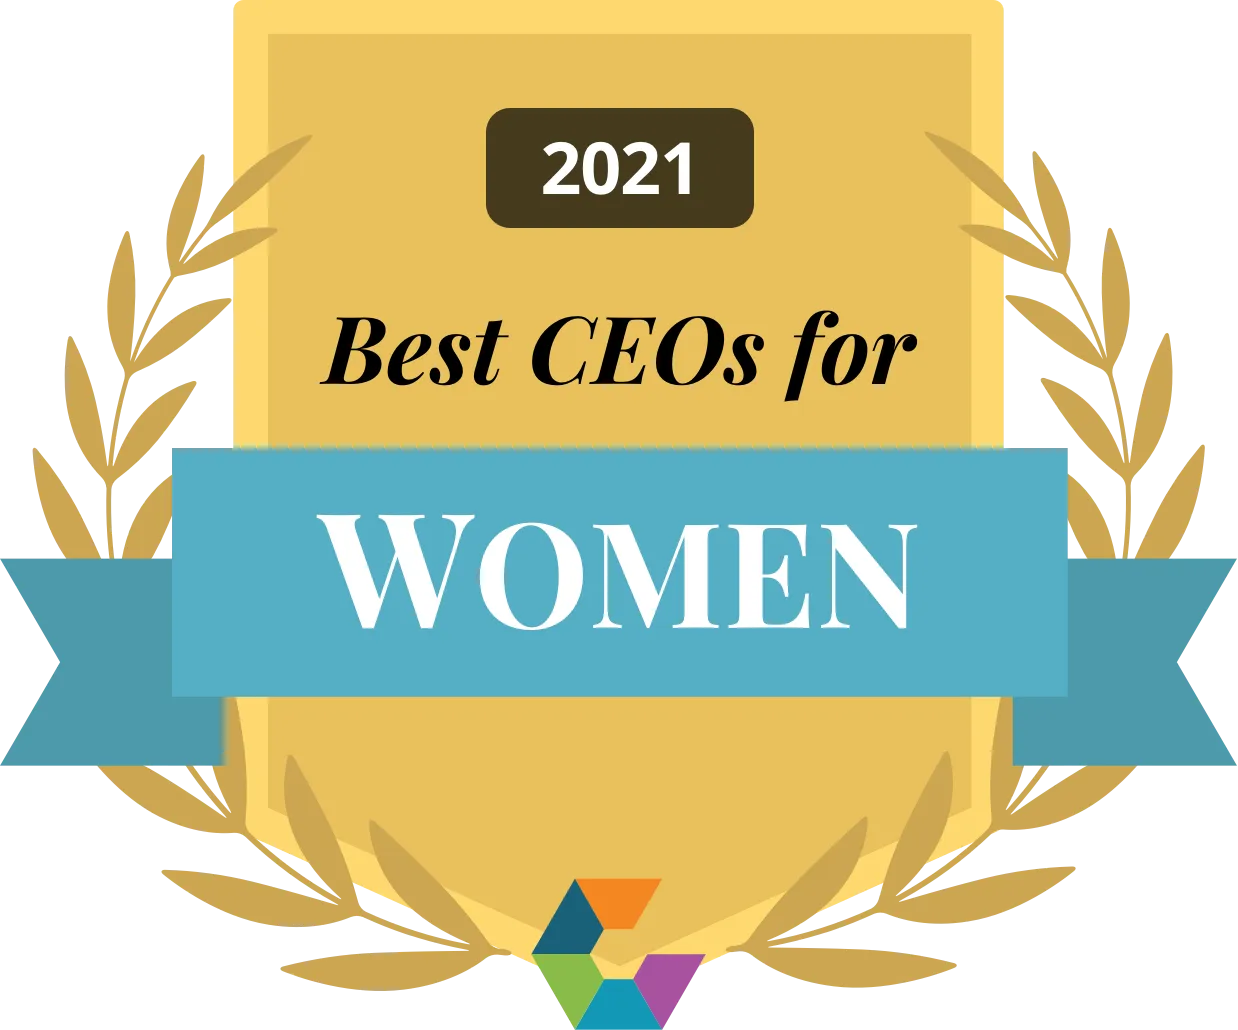 Comparably Best CEOs for Women 2021